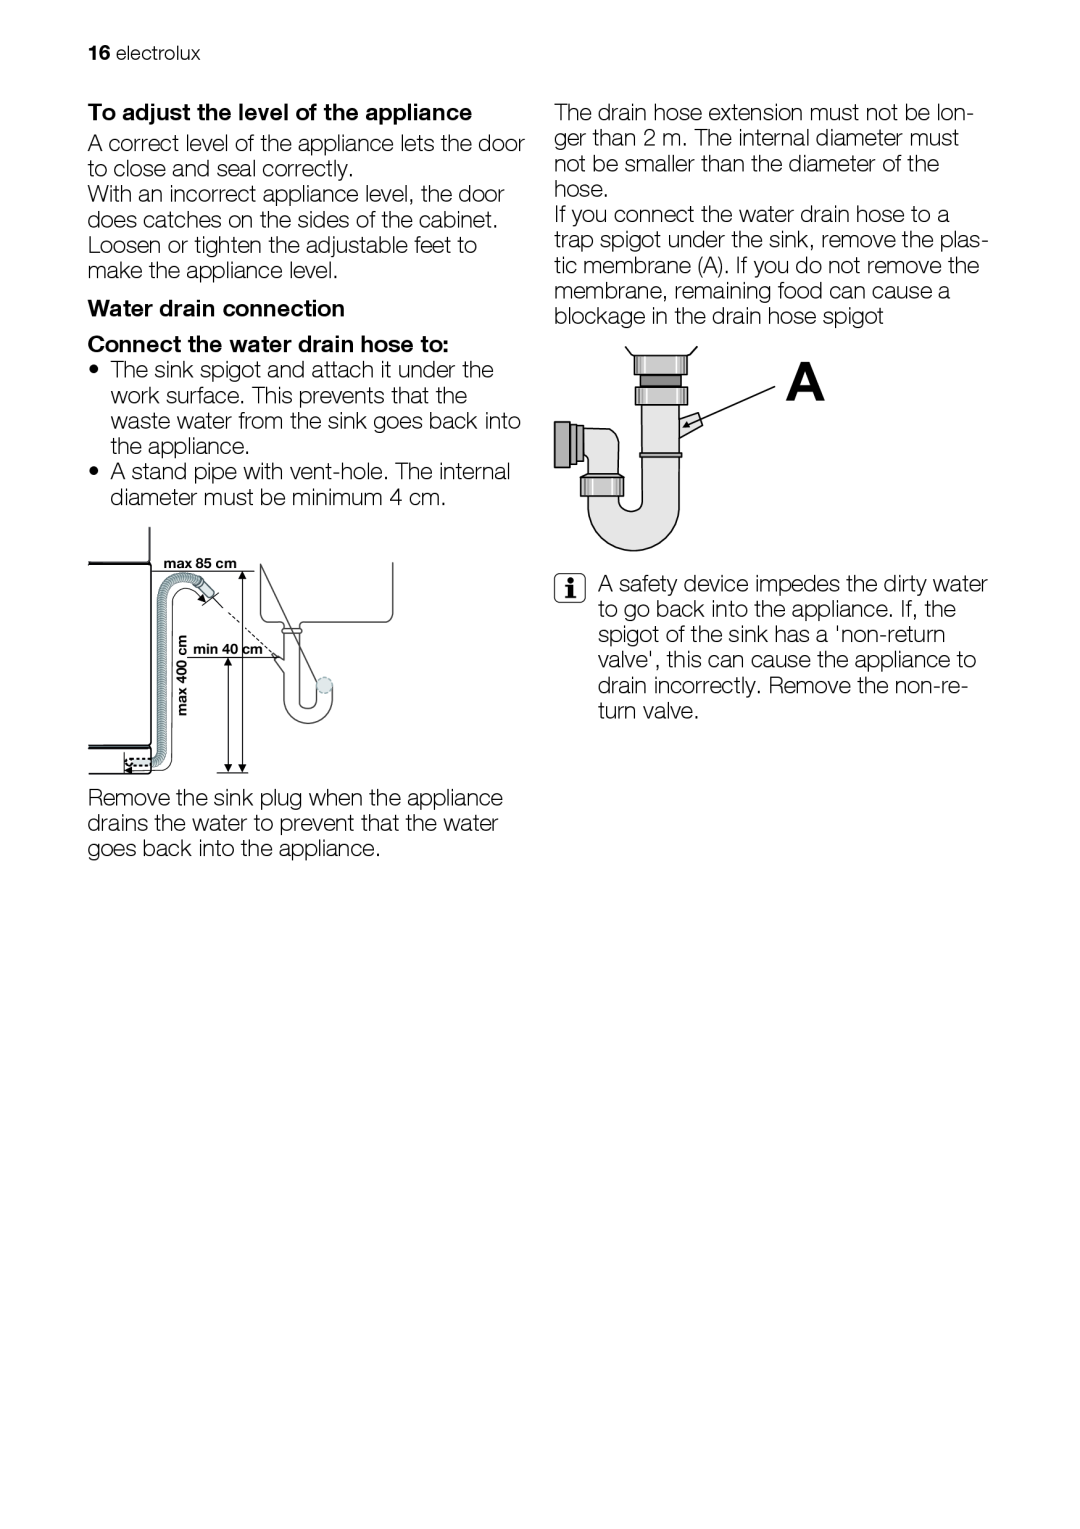 Electrolux ESF63012 To adjust the level of the appliance, Water drain connection Connect the water drain hose to 